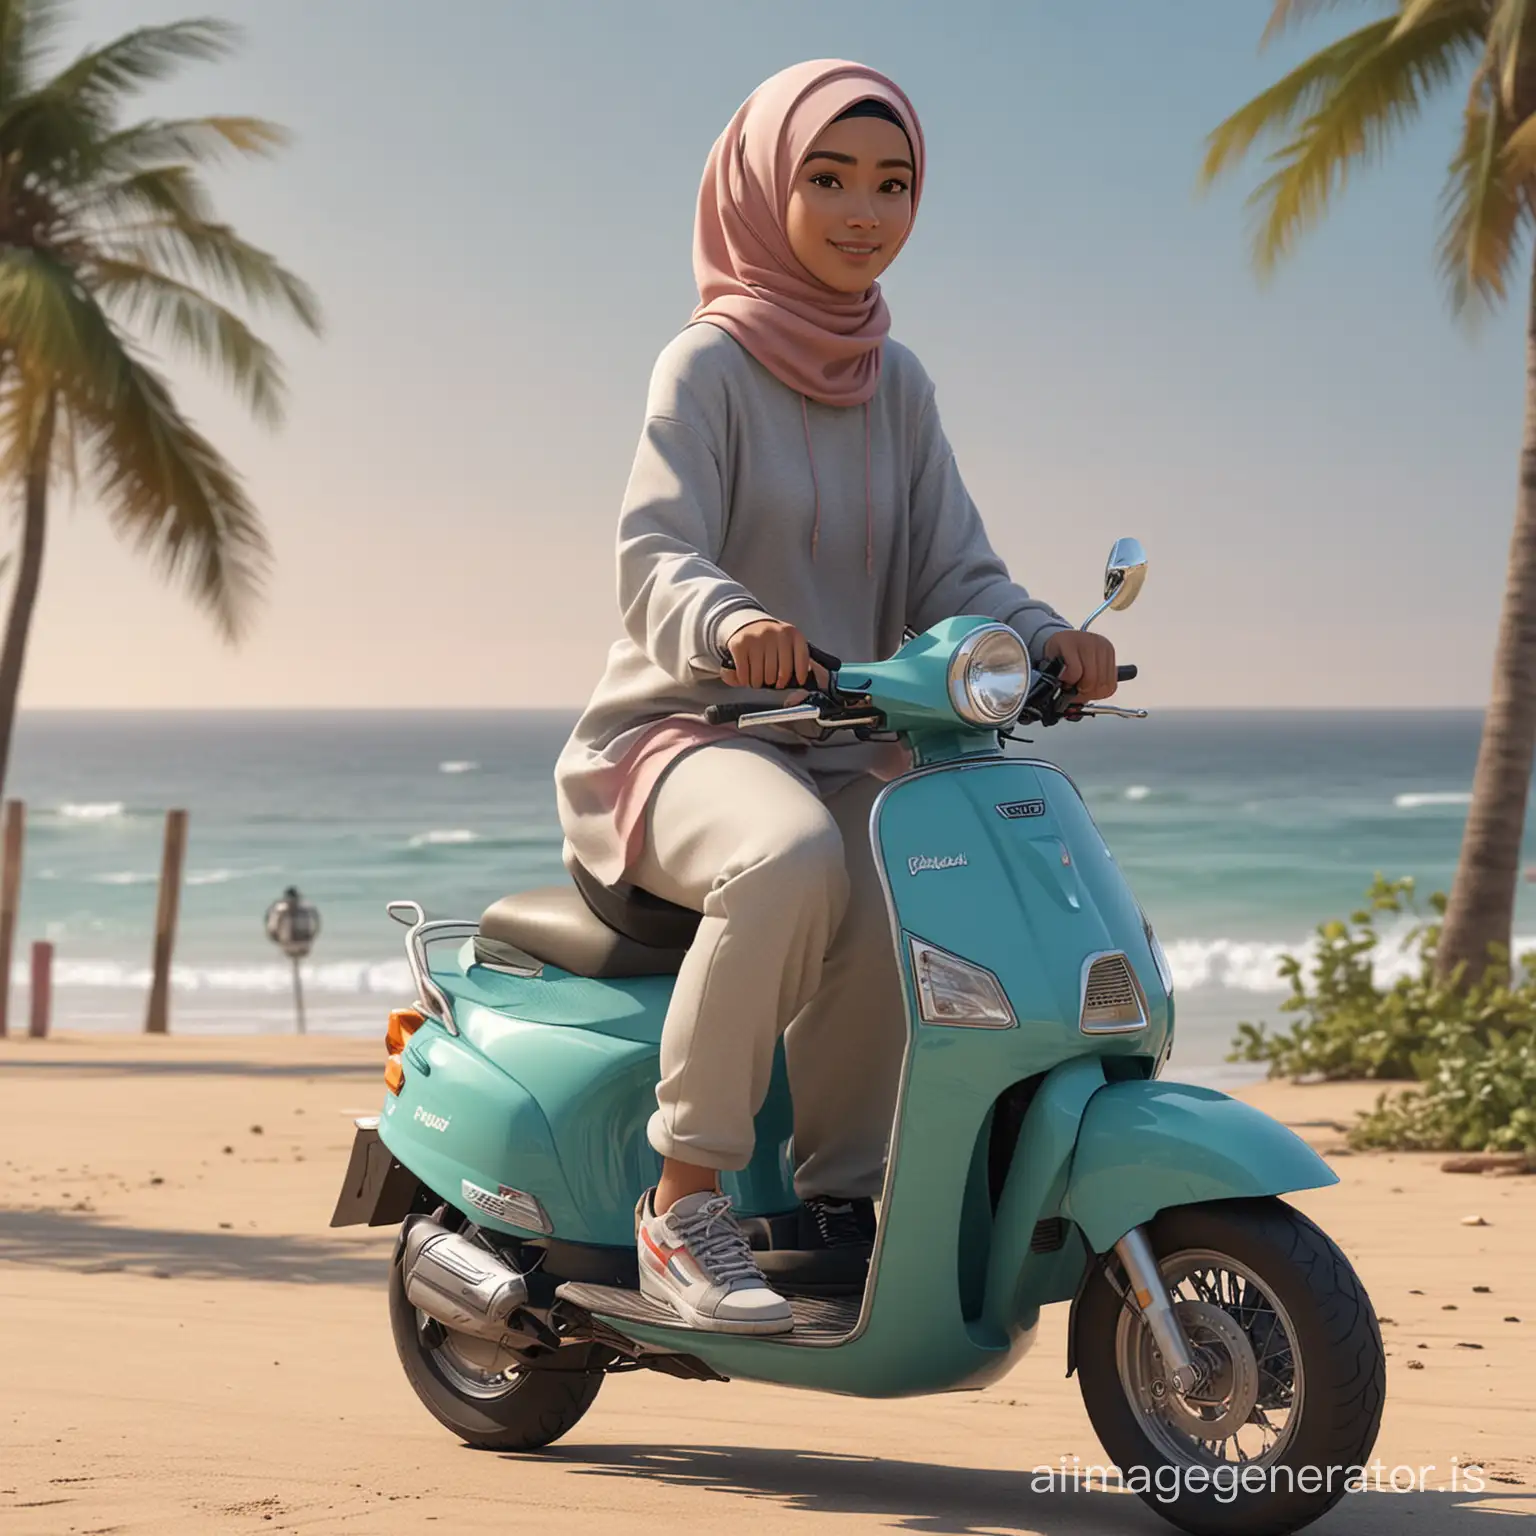 Indonesian-Women-Enjoying-a-Scooter-Ride-Along-the-Beach-in-Realistic-4D-Cartoon-Style